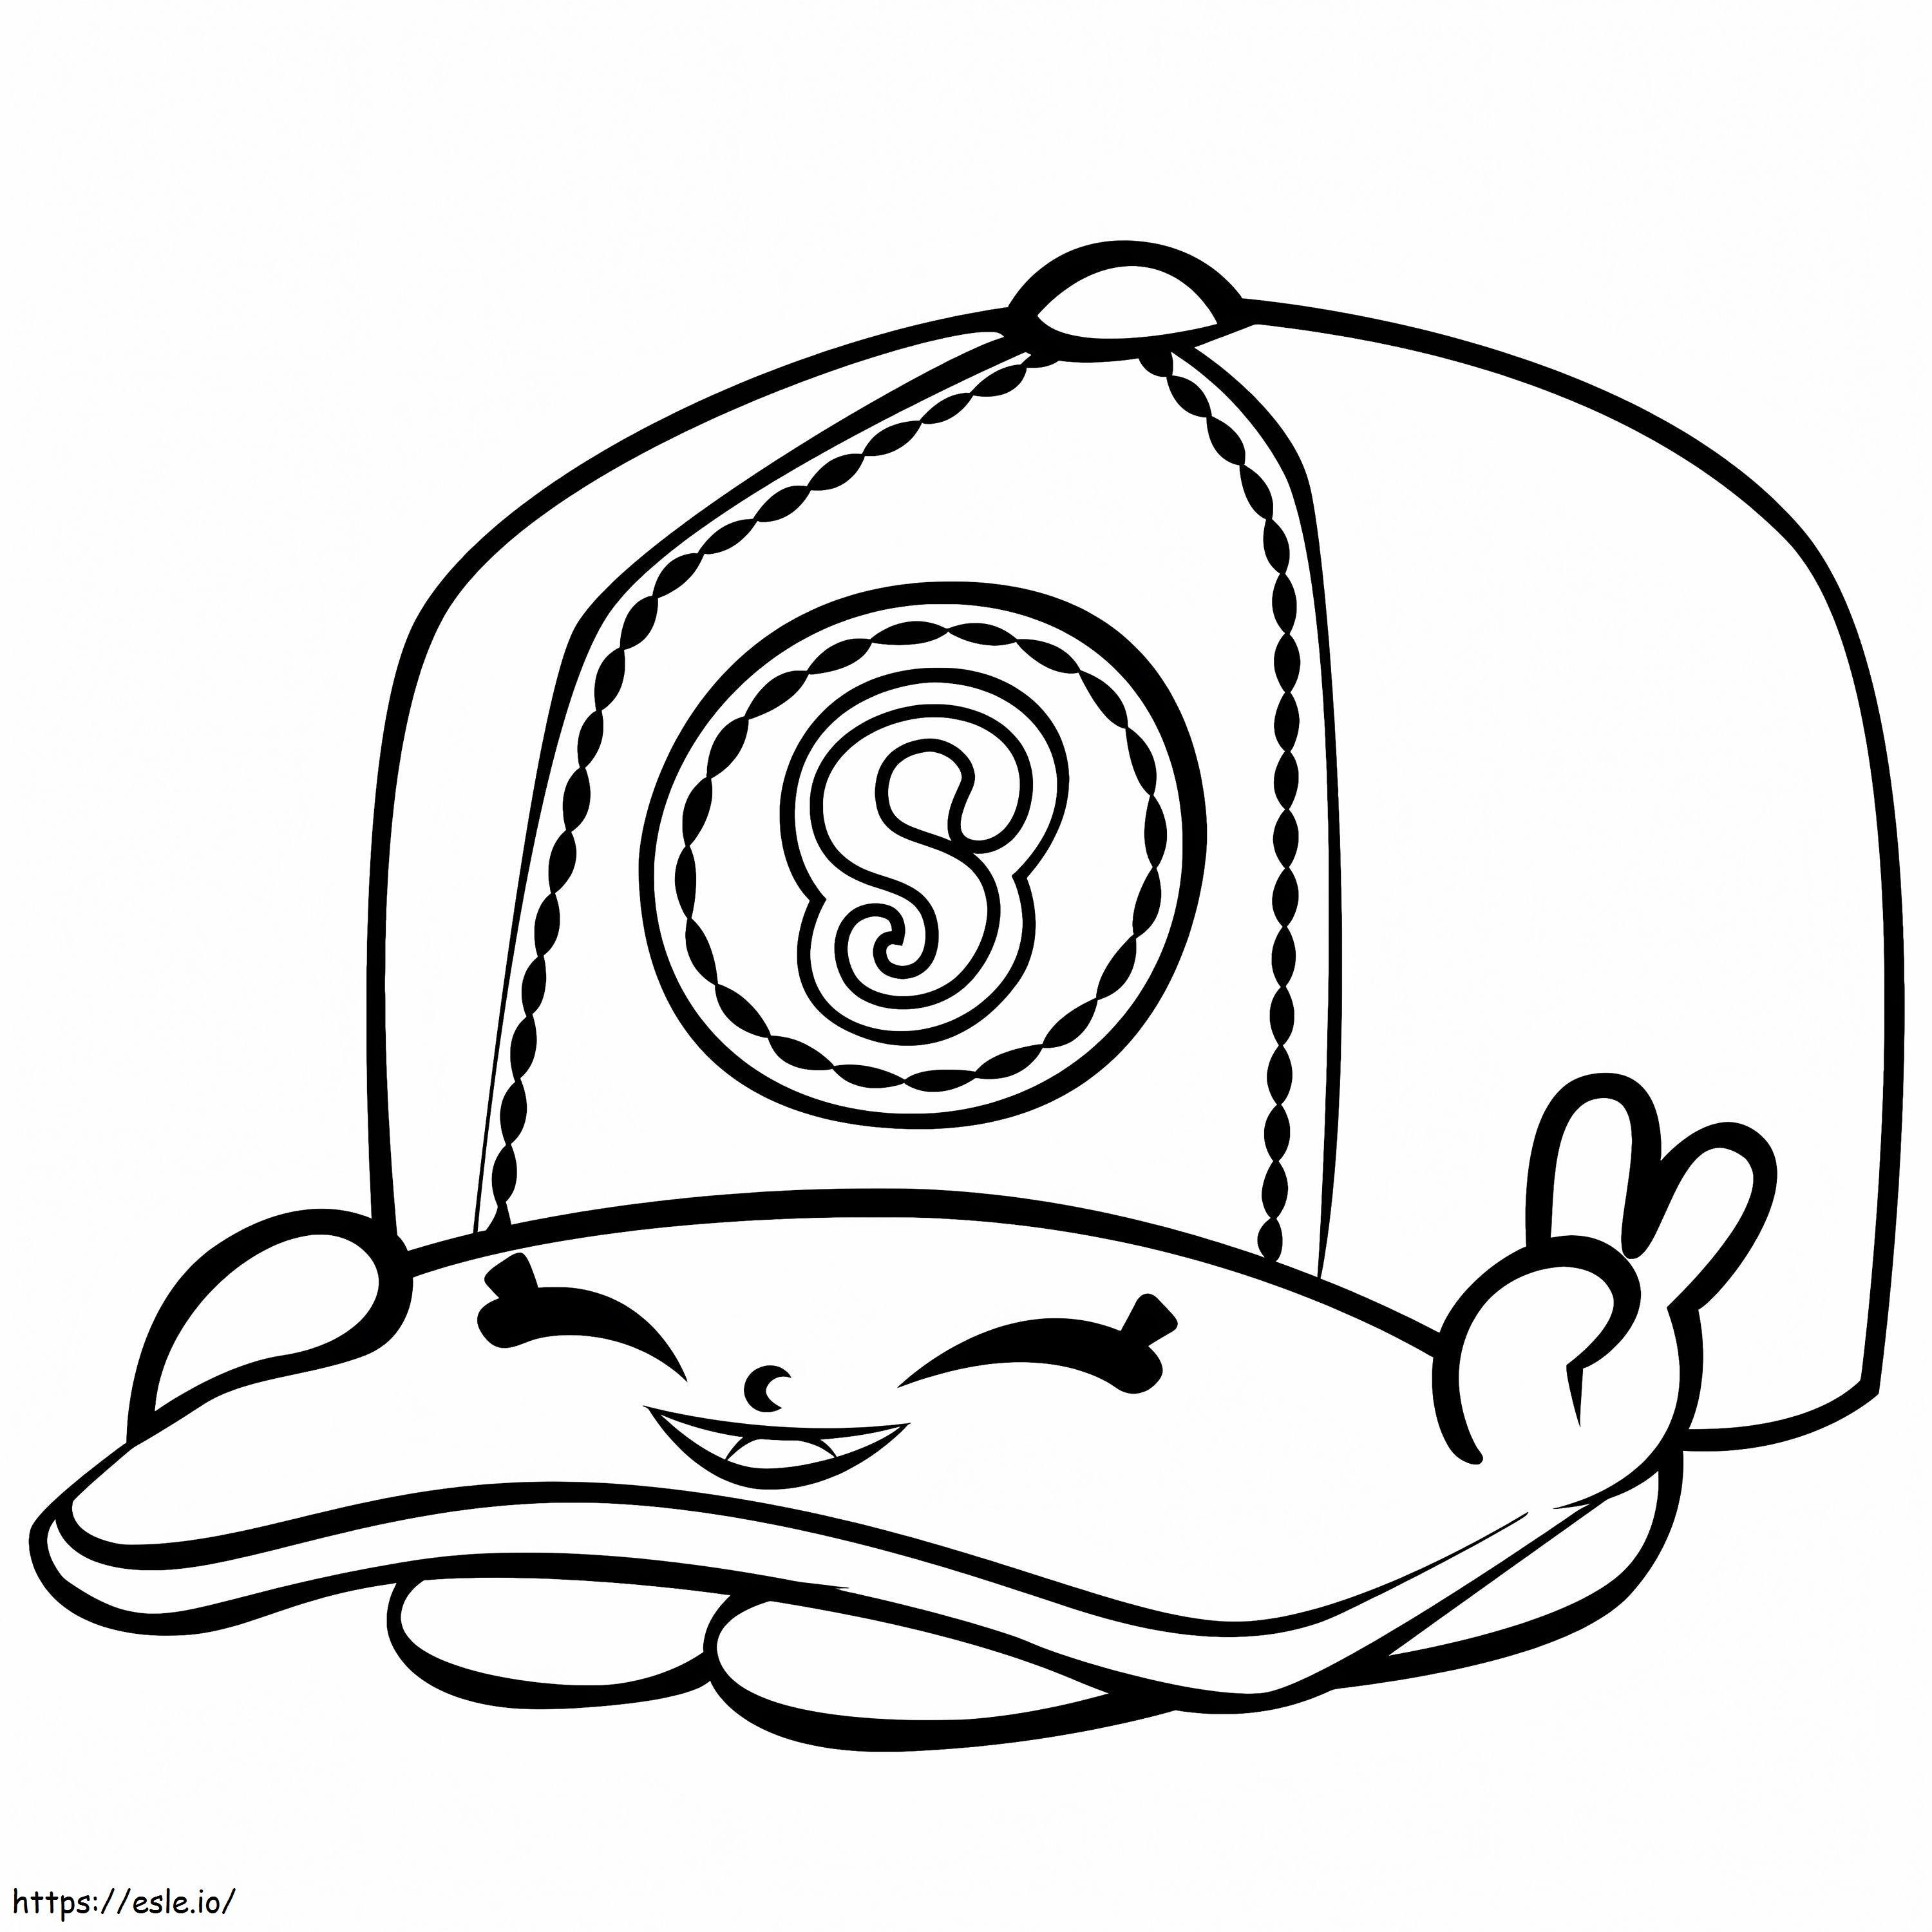 1542095423 Free Of Shopkins Winter Hat To Print 17 E coloring page